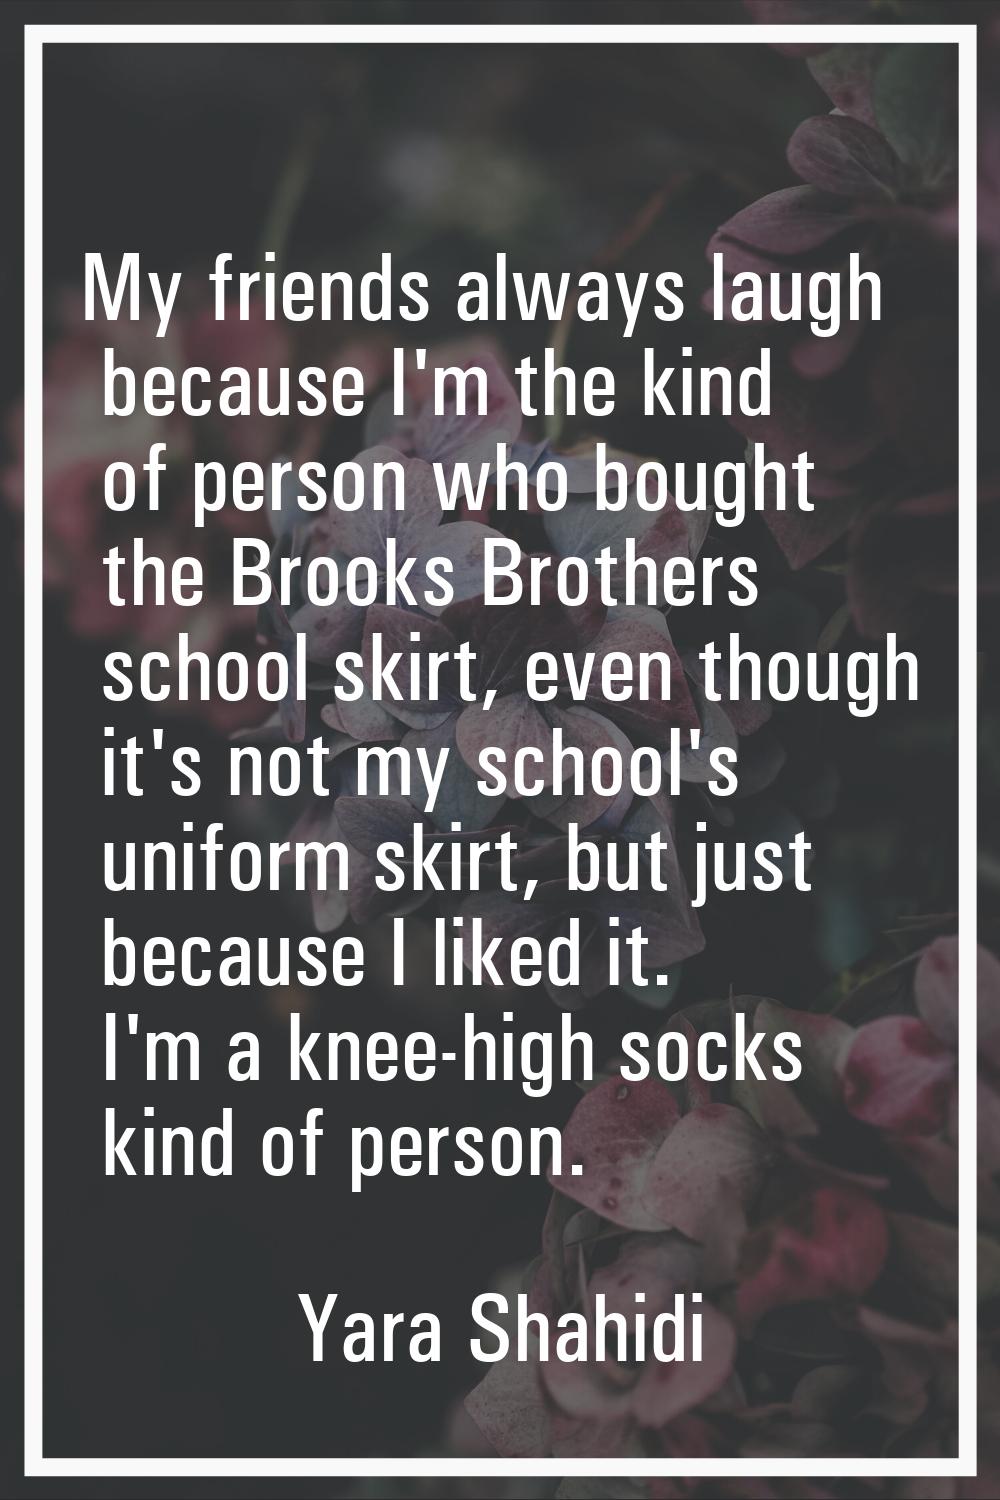 My friends always laugh because I'm the kind of person who bought the Brooks Brothers school skirt,